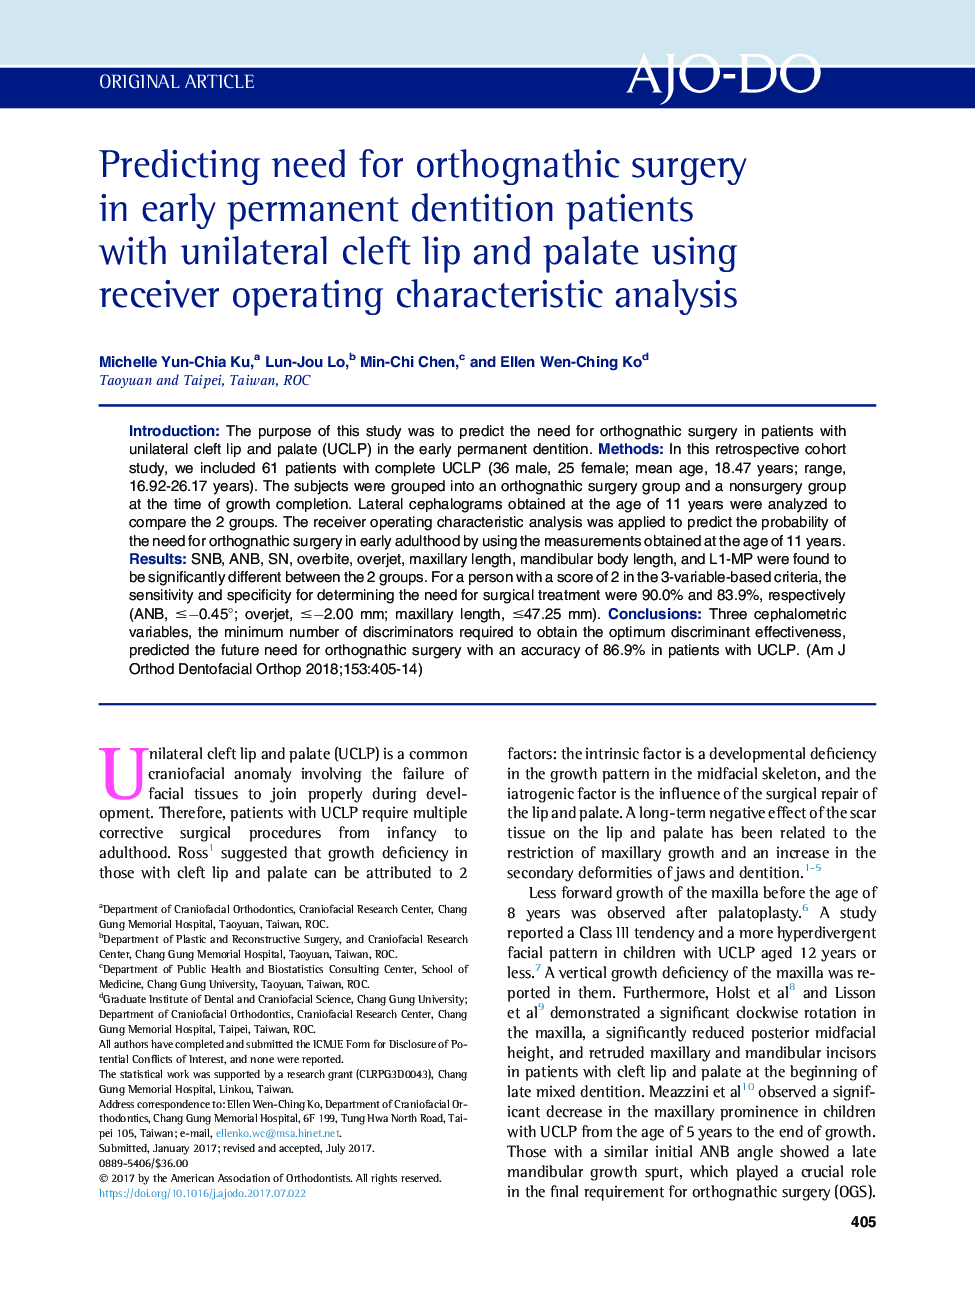 Predicting need for orthognathic surgery in early permanent dentition patients with unilateral cleft lip and palate using receiver operating characteristic analysis